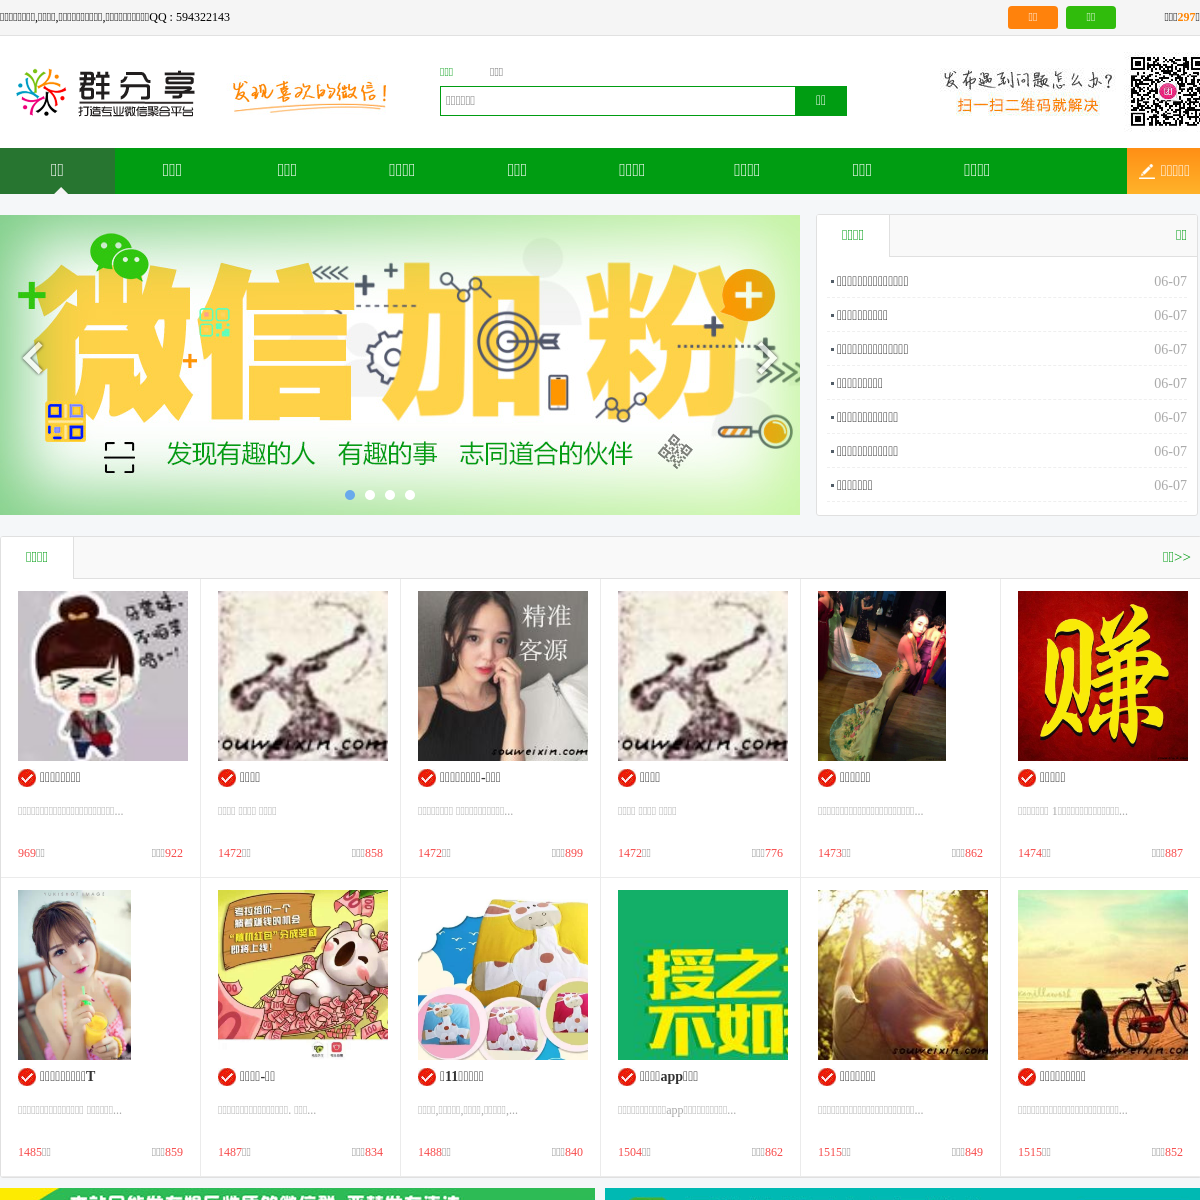 A complete backup of weixinla.com